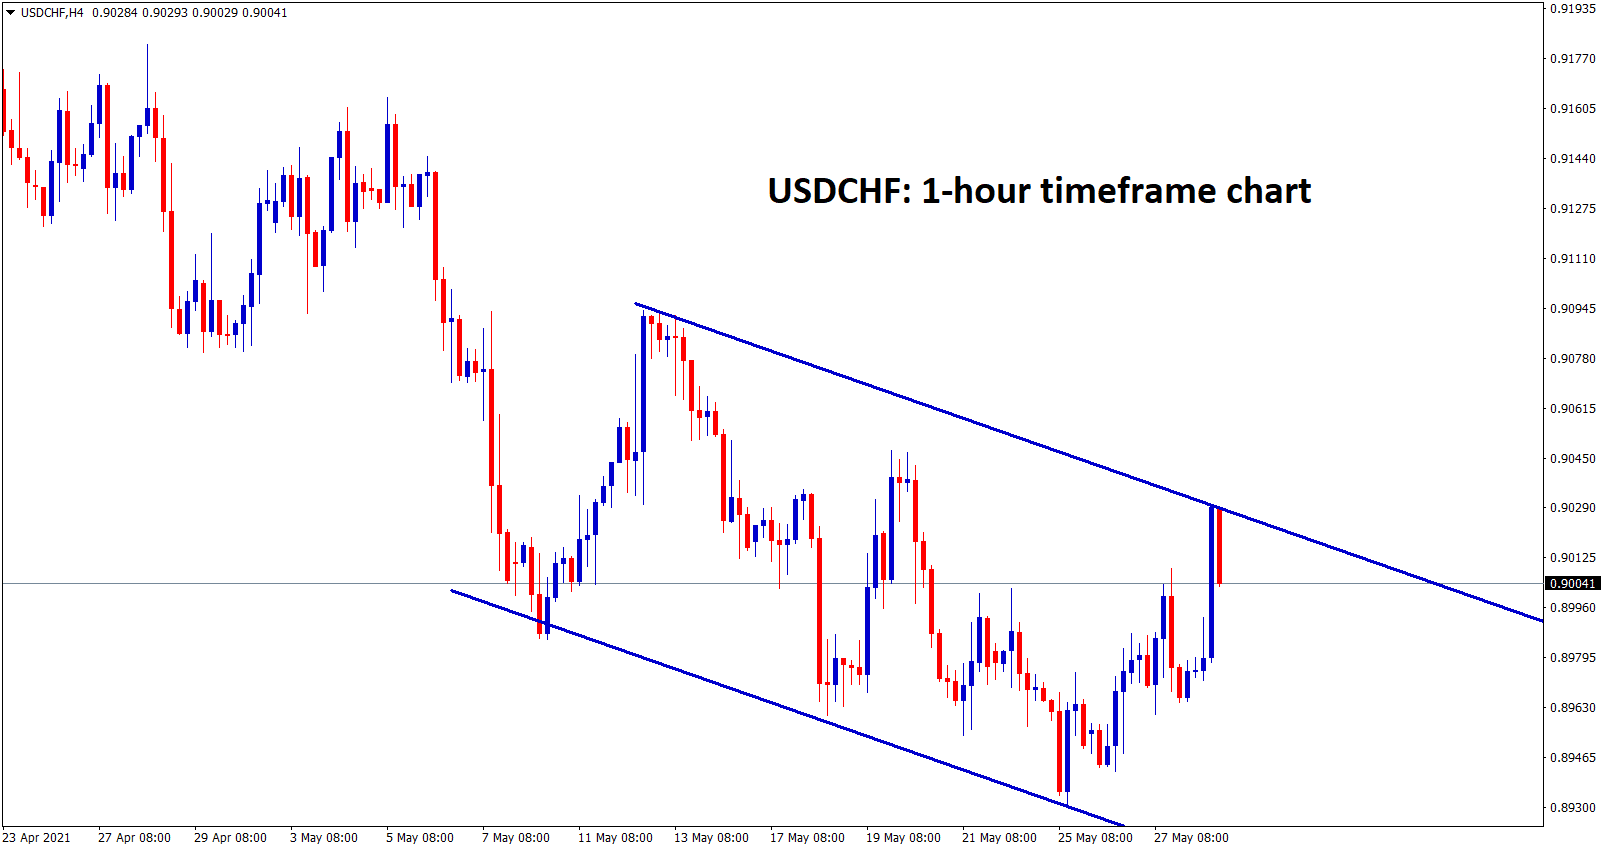 USDCHF is moving in a descending channel range in 4hour chart